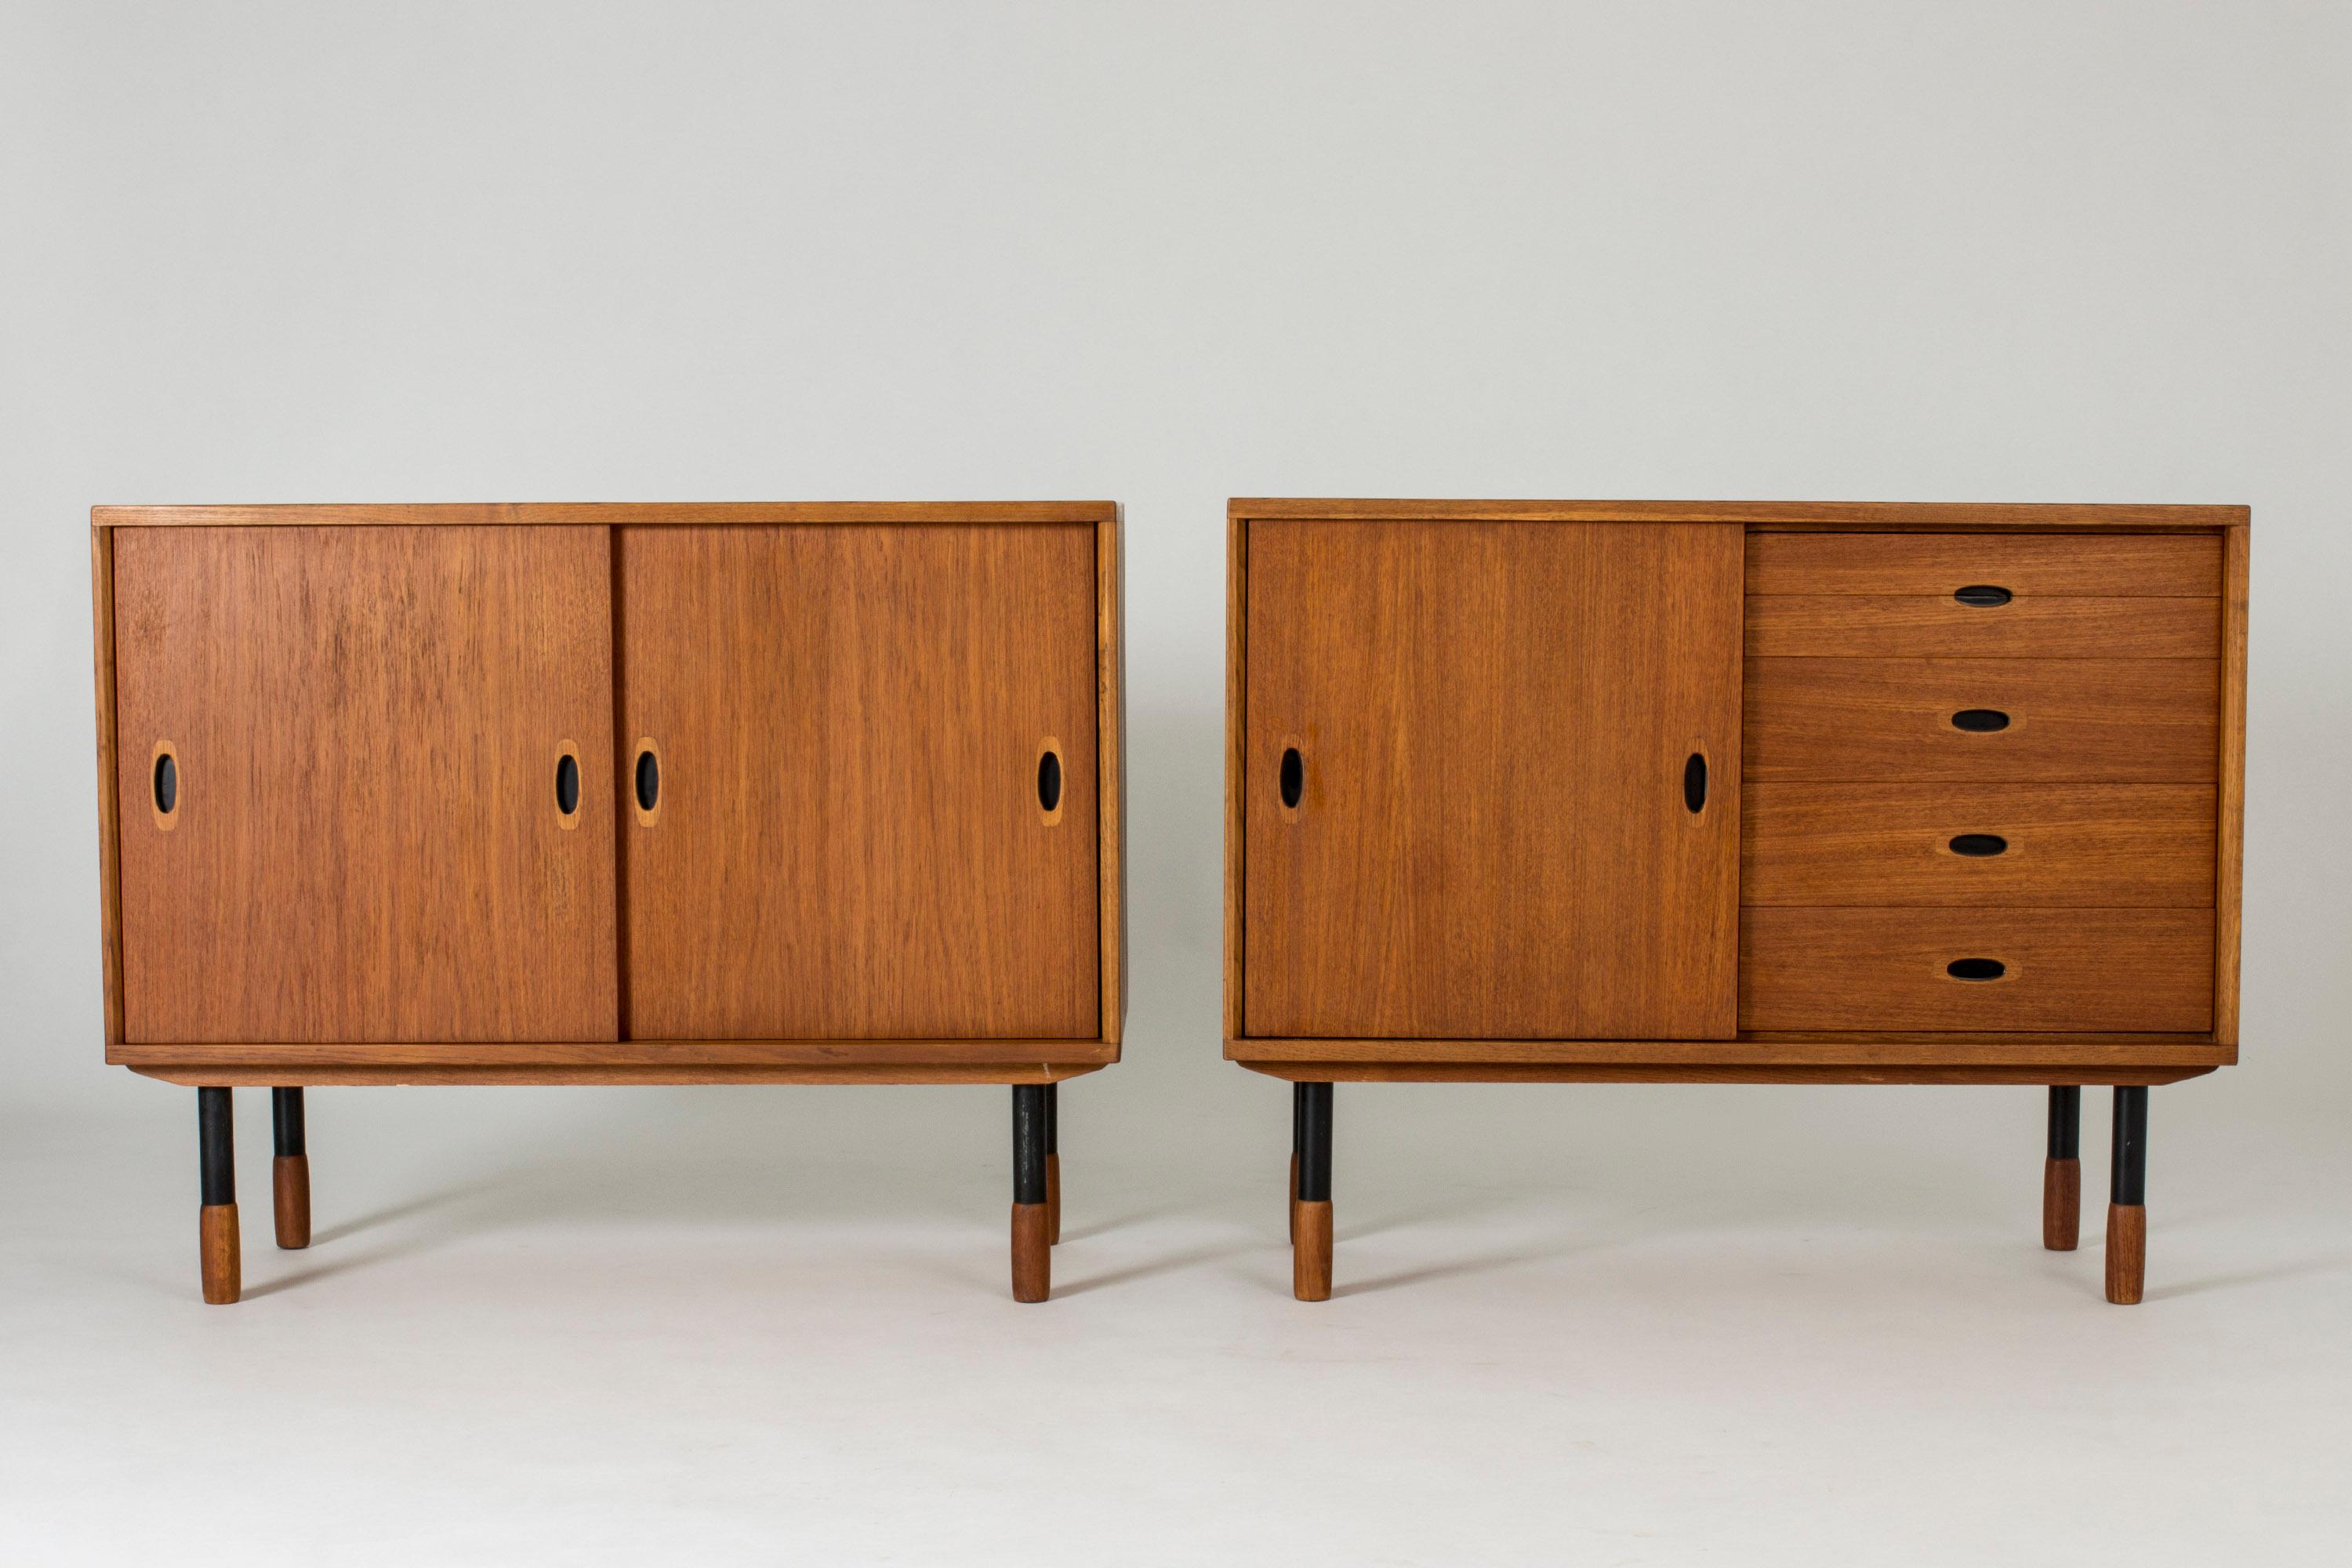 Pair of cool sideboards from Westbergs Möbler, made from teak with black lacquered metal legs. Chunky teak feet and details of black hollowed drawer handles. One of the sideboards has drawers on one side.